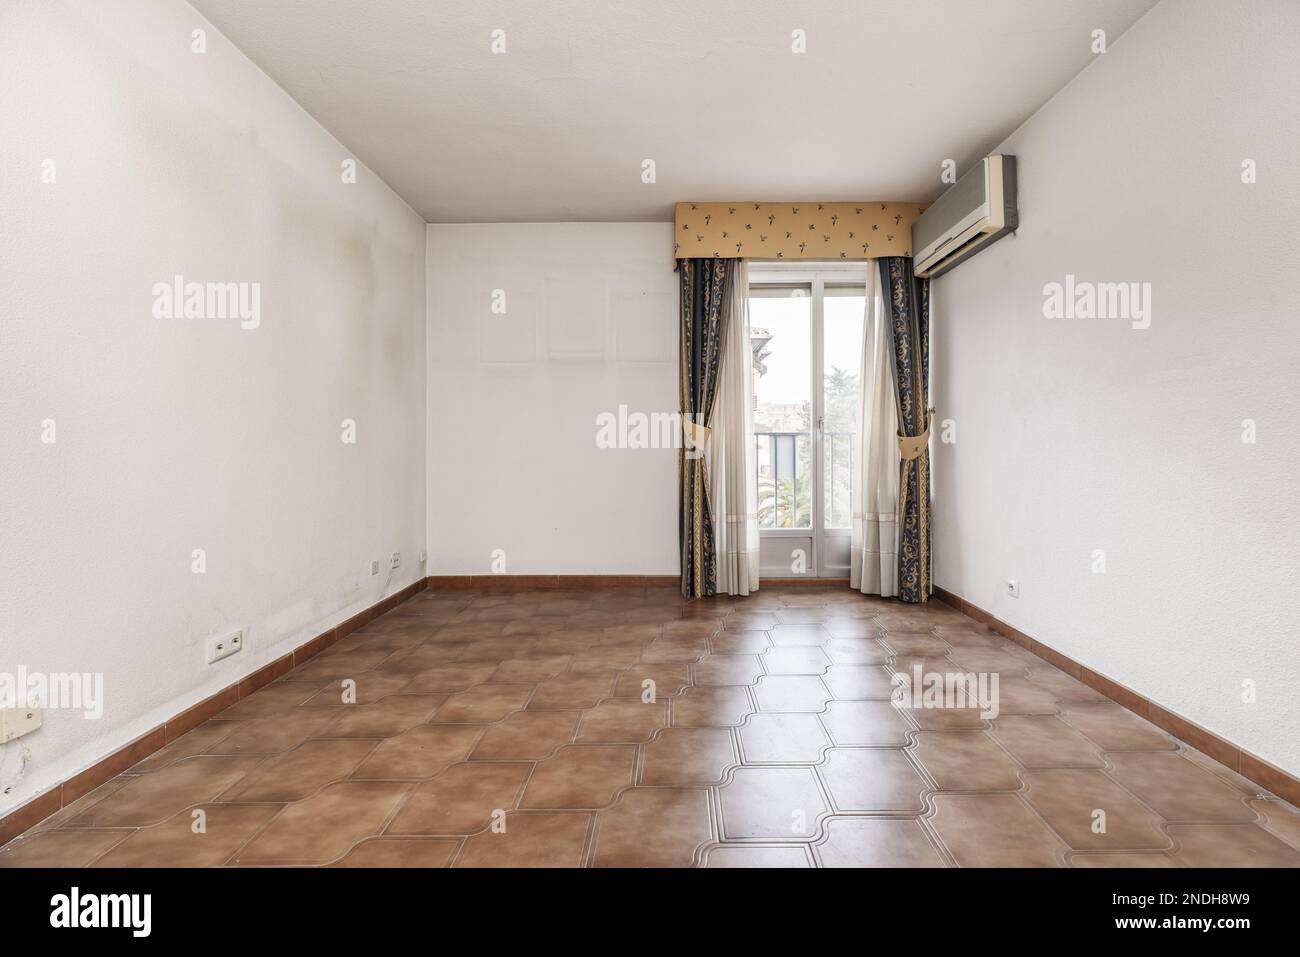 Empty room with old brown stoneware floor, wall mounted air conditioner and balcony with curtains and sheers Stock Photo